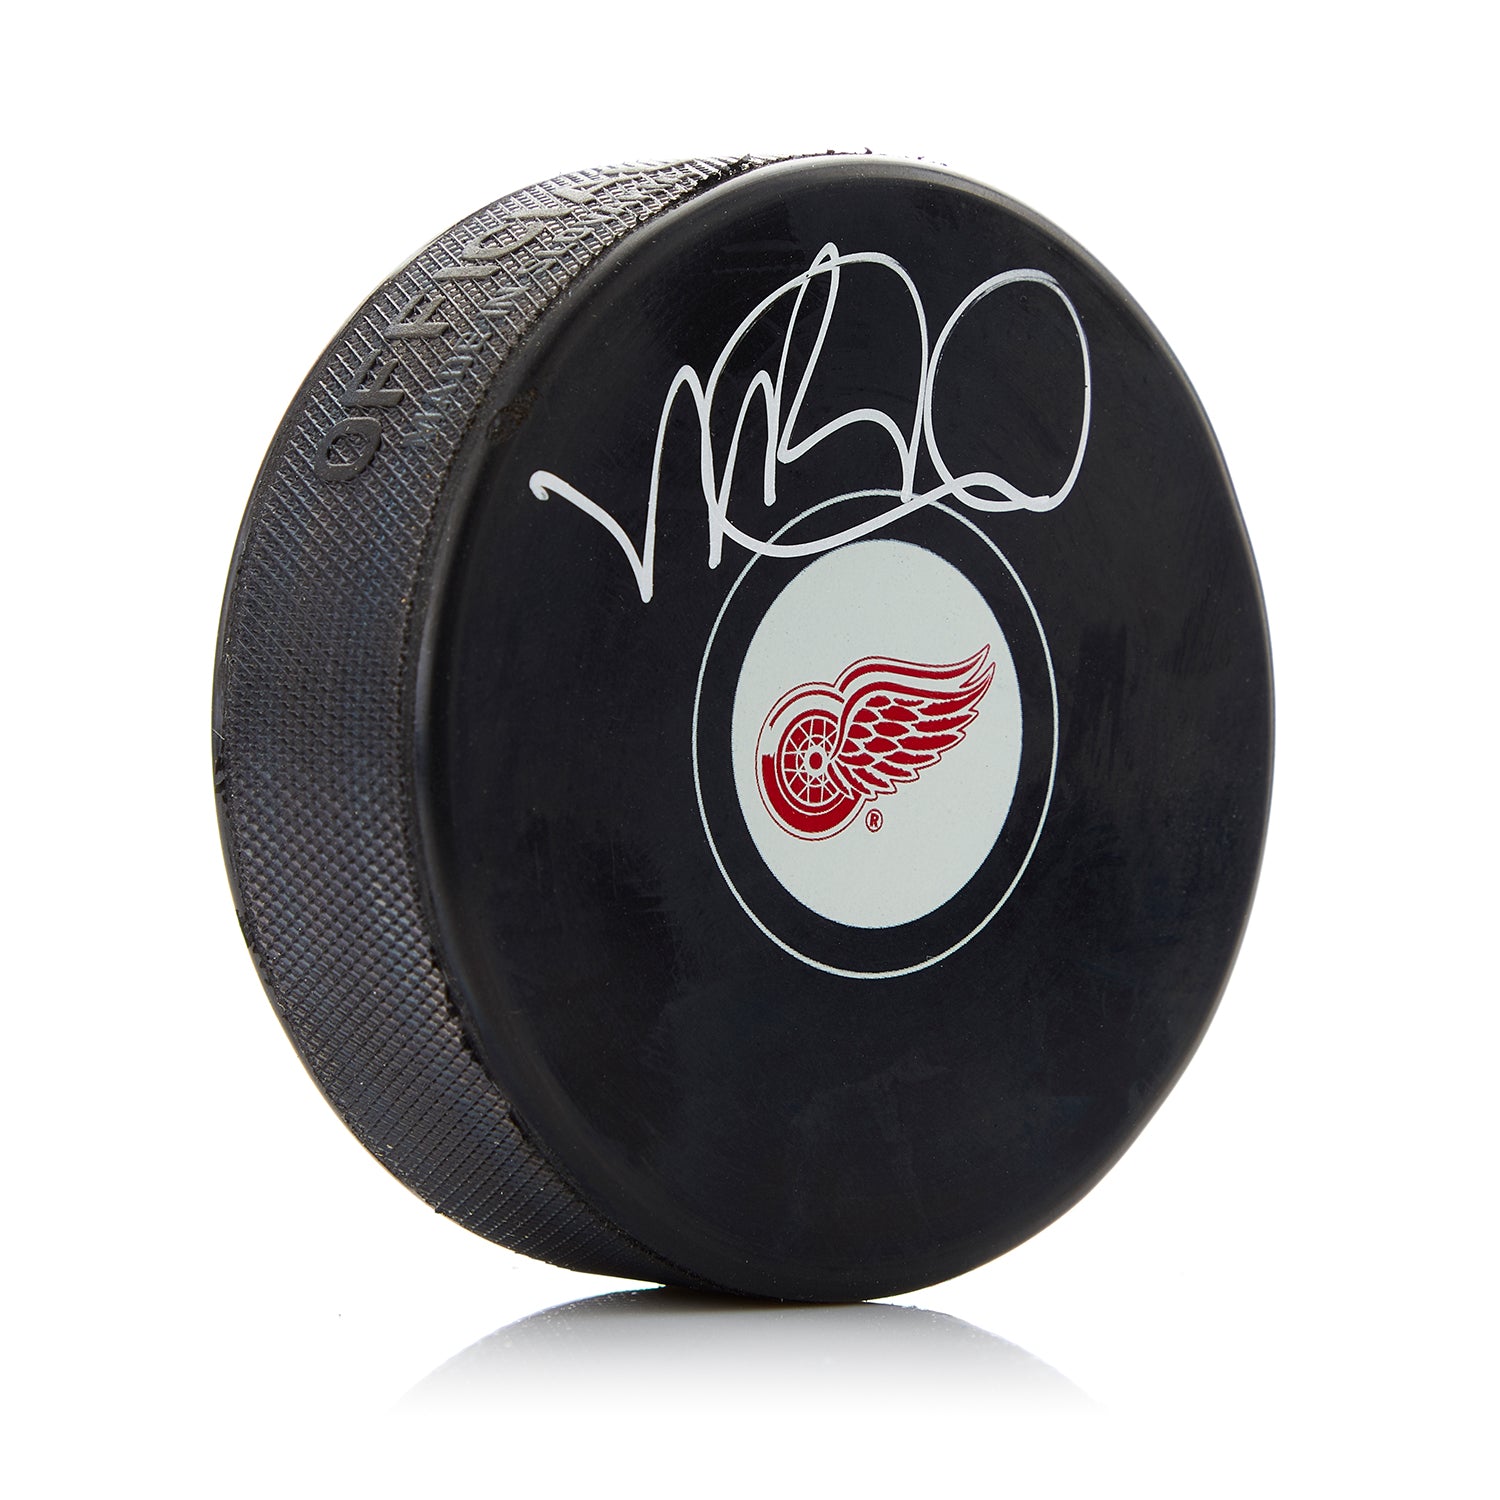 Mike Babcock Detriot Red Wings Autographed Hockey Puck